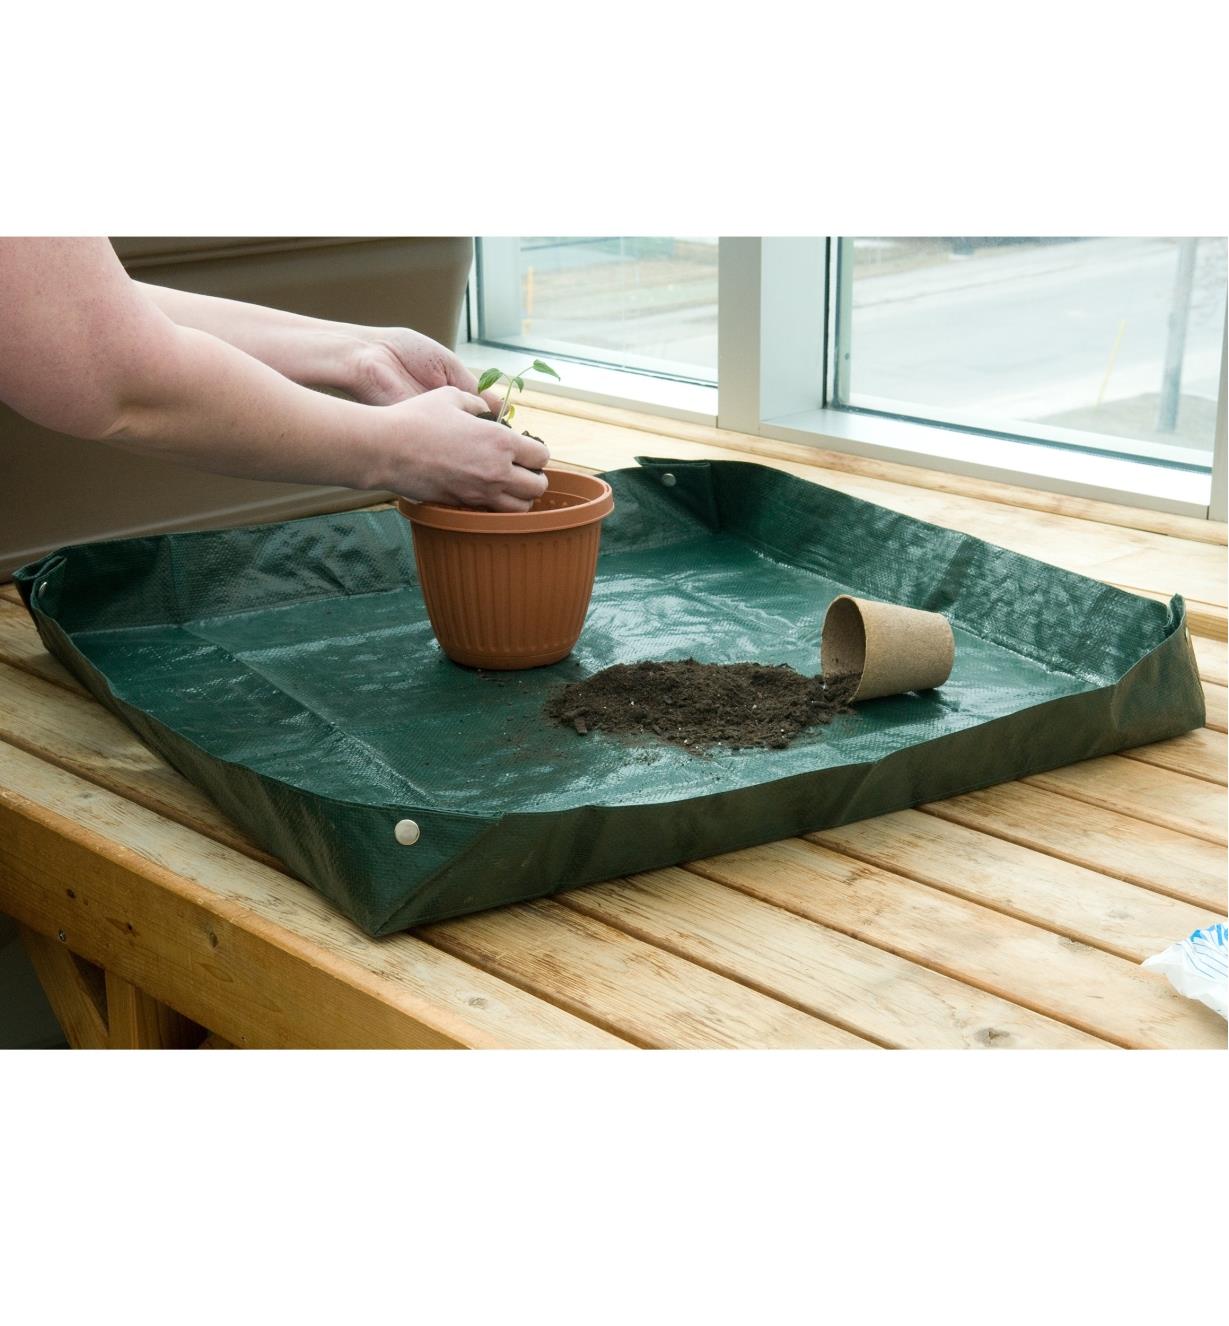 Potting a seedling on the Tabletop Tarp